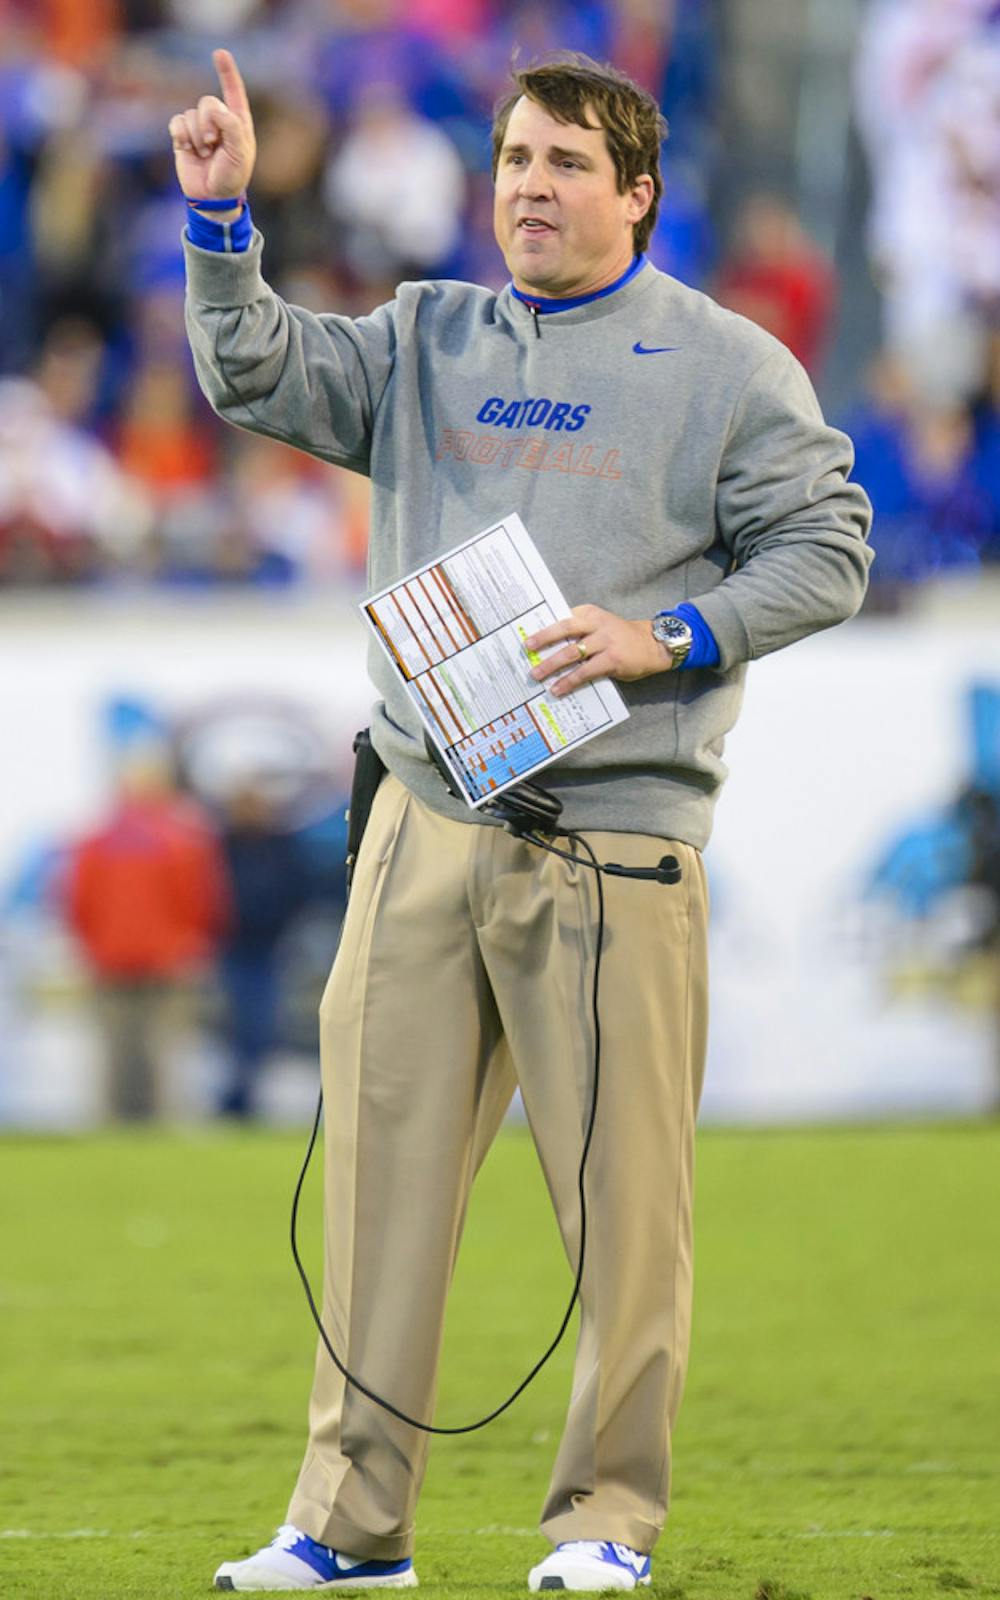 <p>Will Muschamp signals during UF's 38-20 win against UGA on Nov. 1 at EverBank Field in Jacksonville.</p>